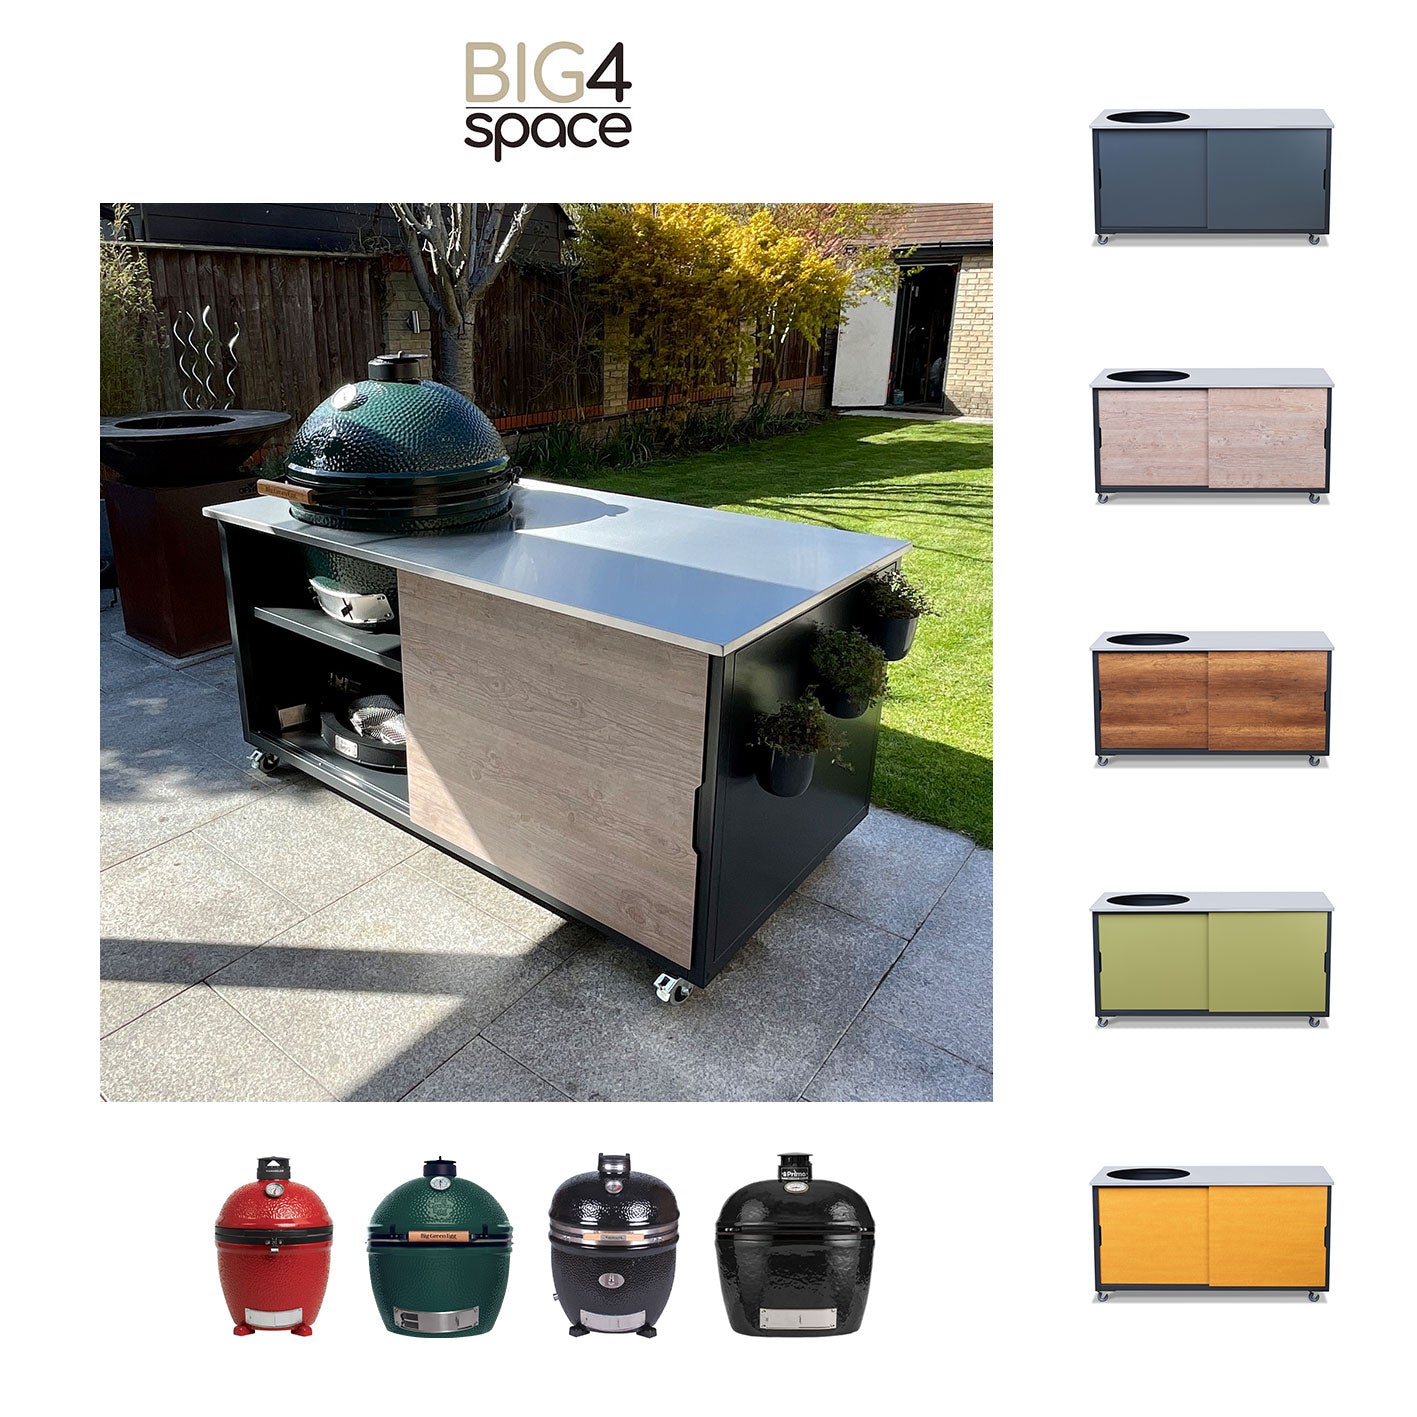 big green egg table - kamadospace - big4space - kamado table - Kamado kitchen - Outdoor kitchen - big4space 180 extra large table